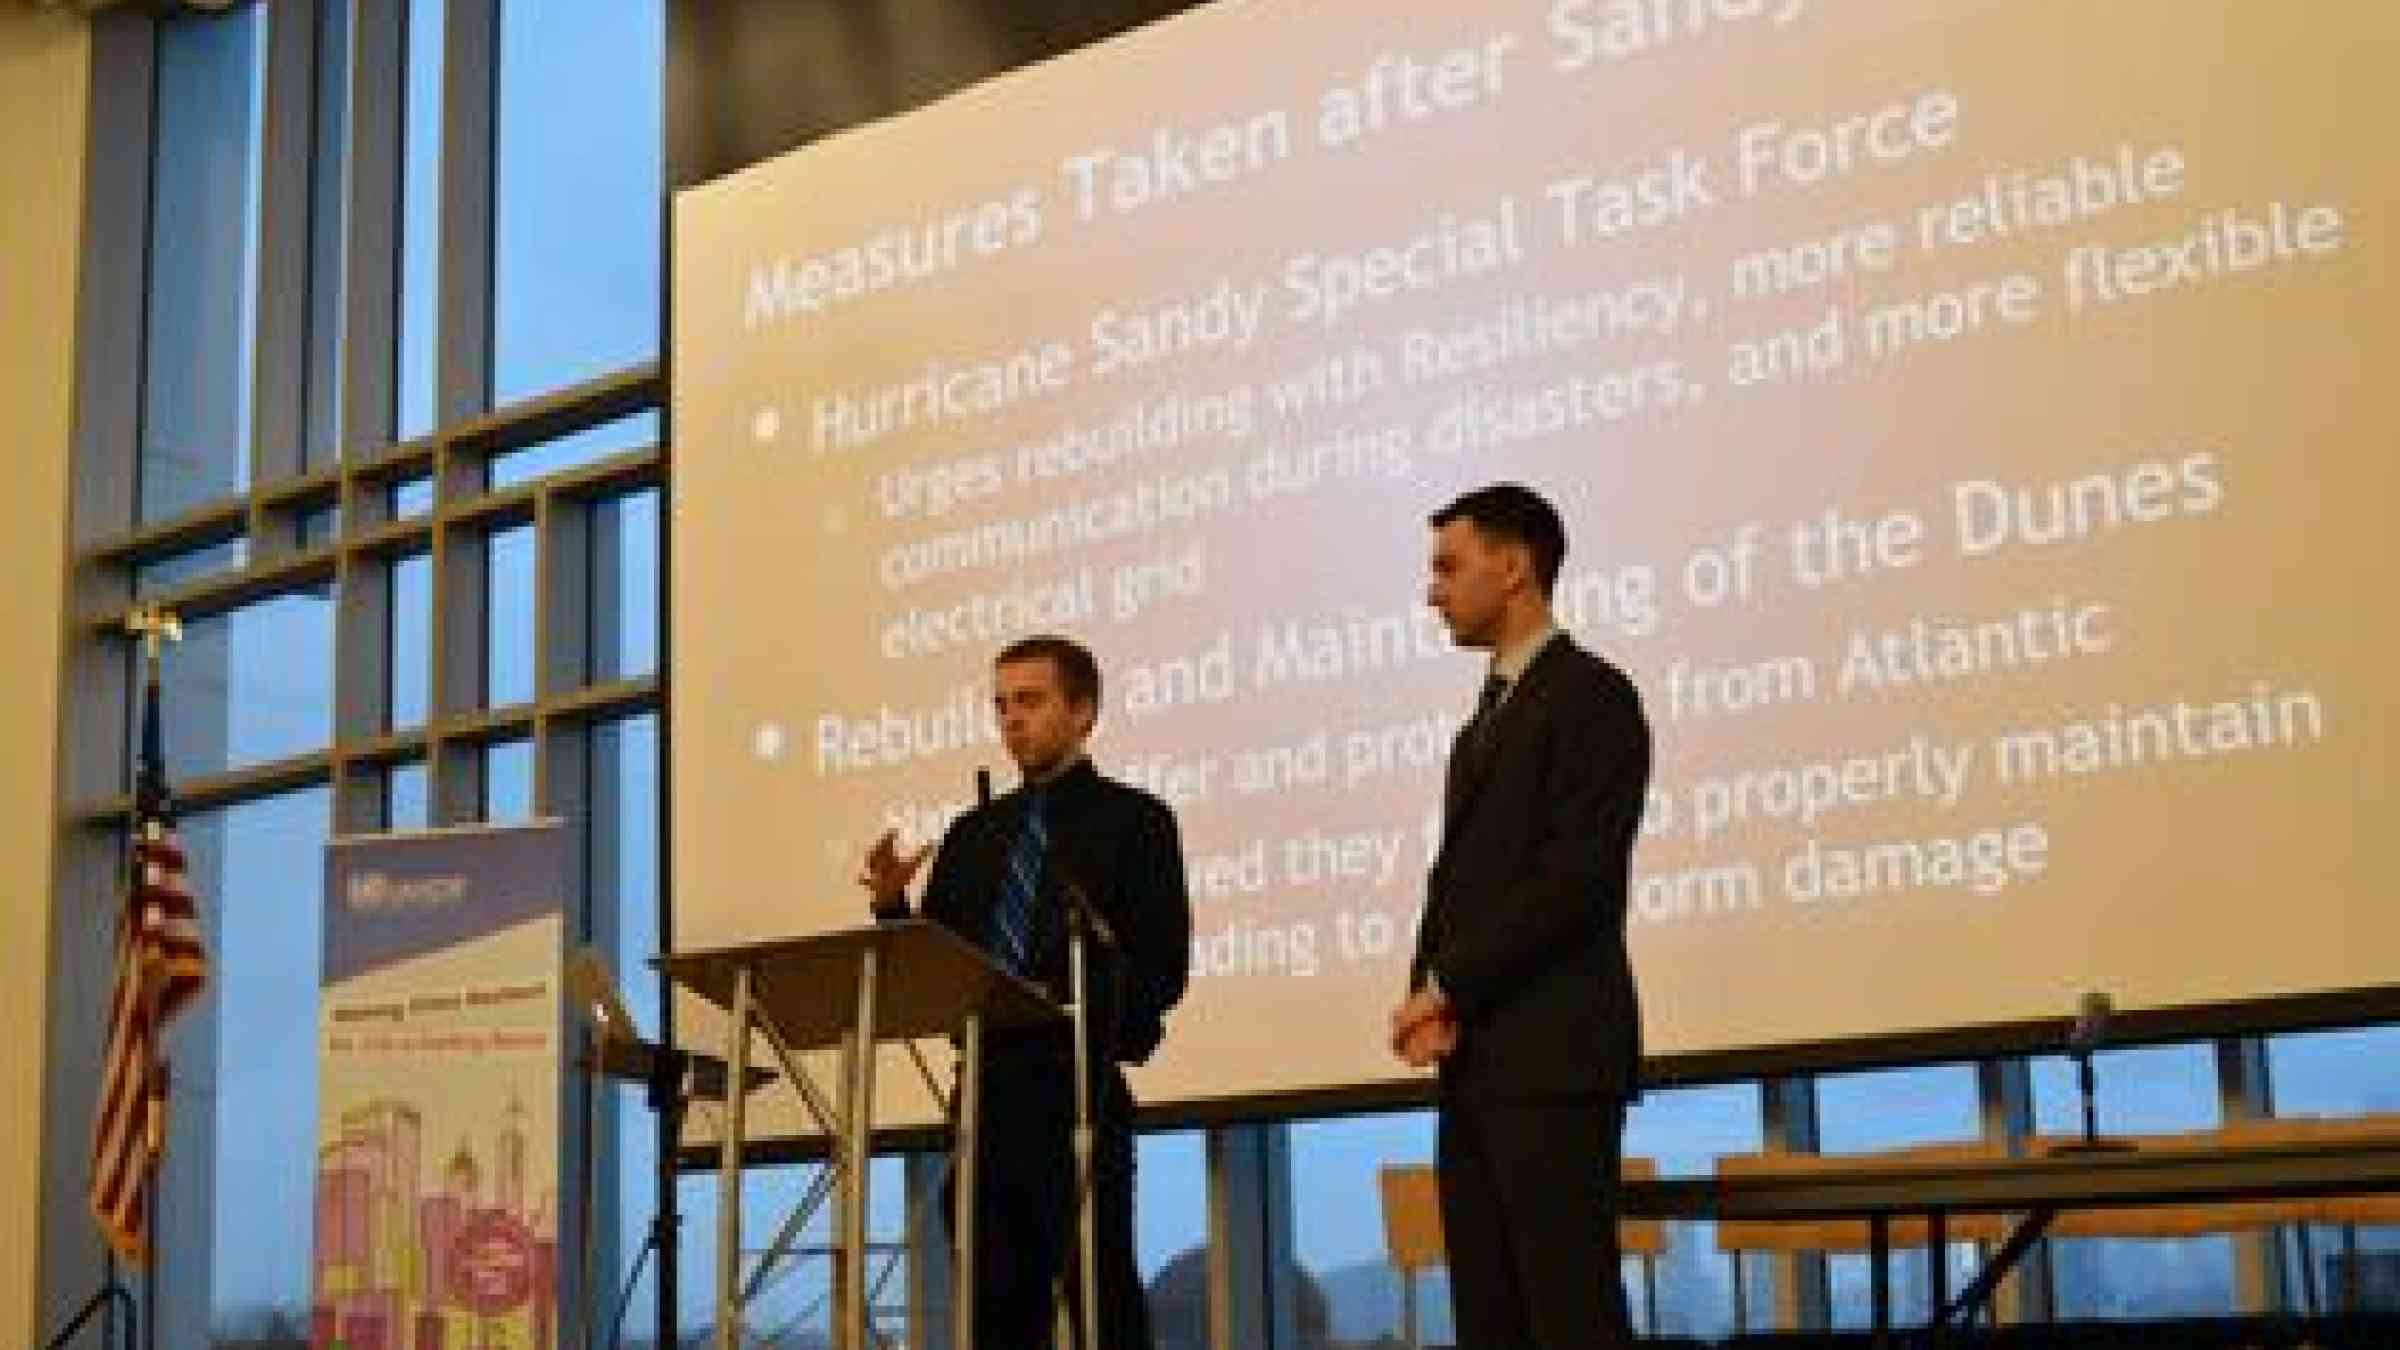 During the course, students Thomas Hrabal and Joseph DeLorenzo present their research on disaster resilience measures in Point Pleasant, New Jersey. (Photo: UNISDR)